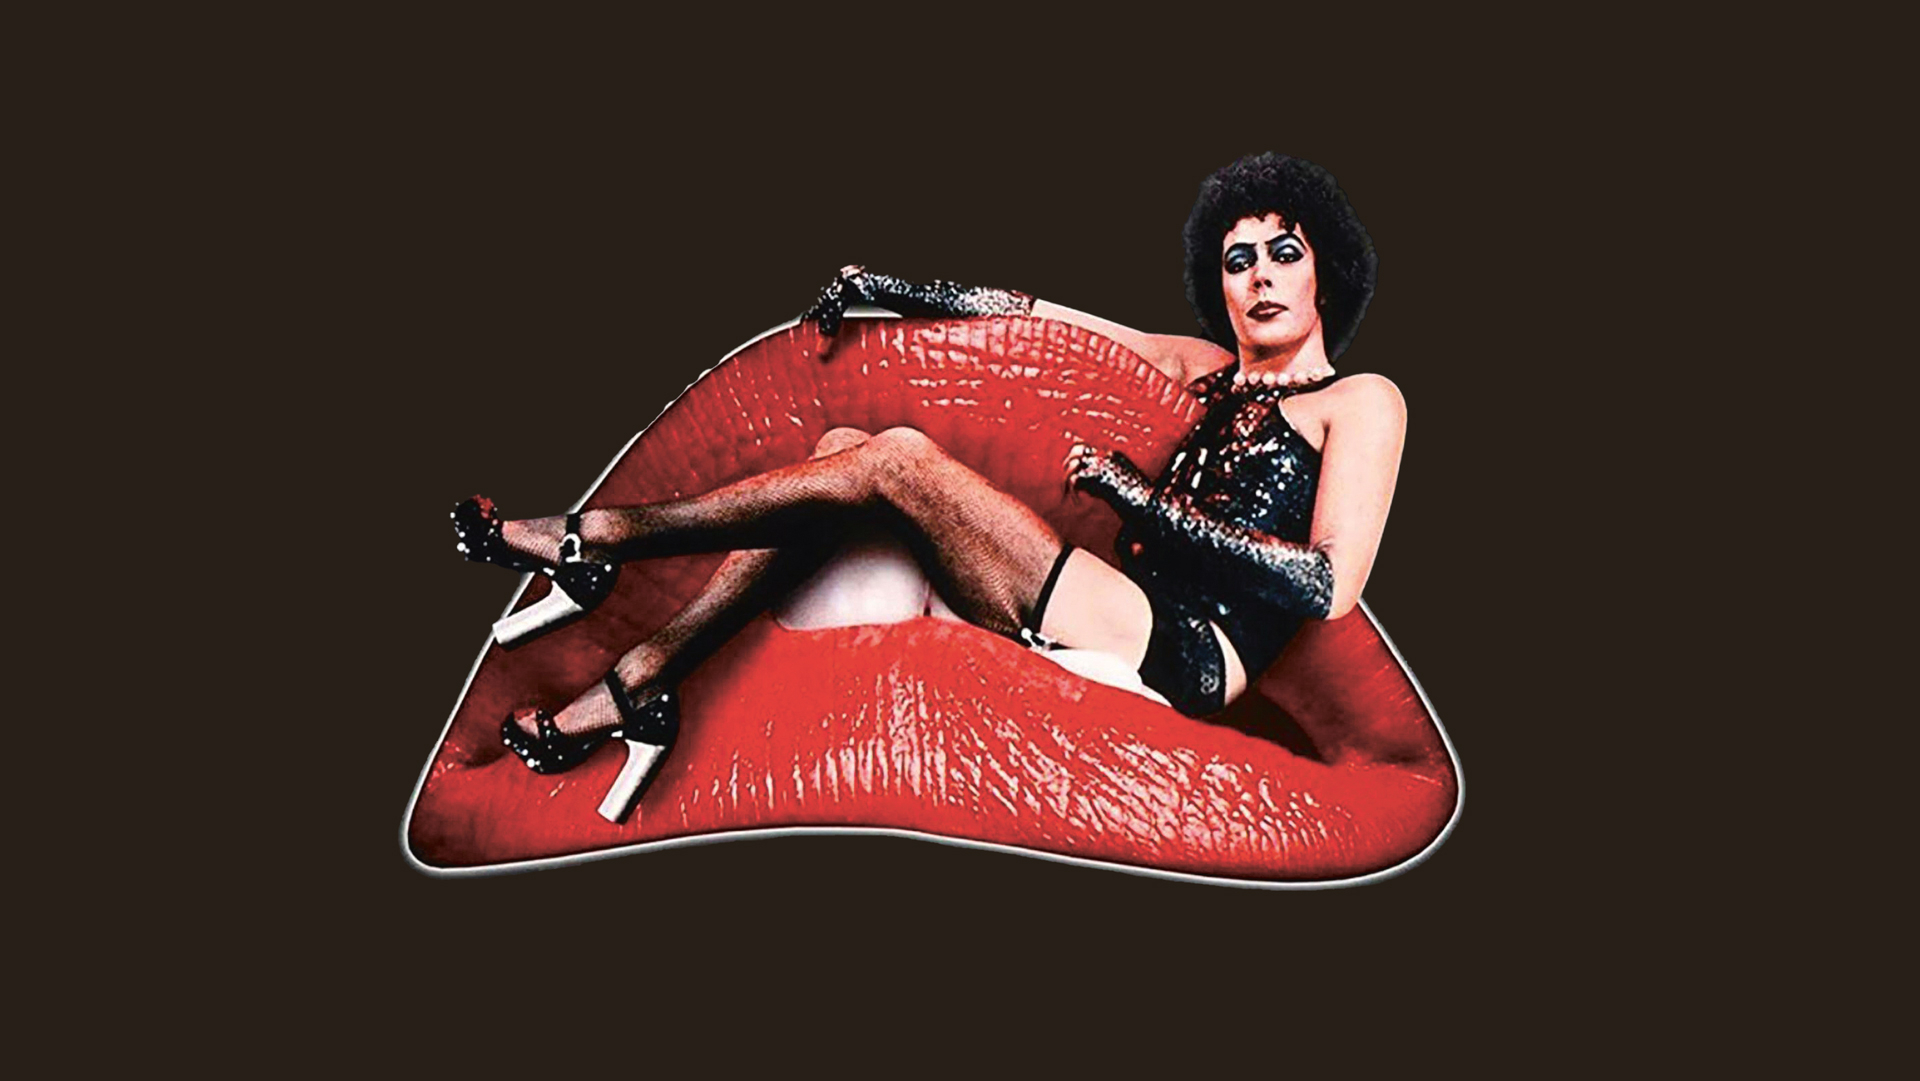 Richard O’Brien: The Rocky Horror Show at 50 is a ‘rainbow event’ - The Big Issue